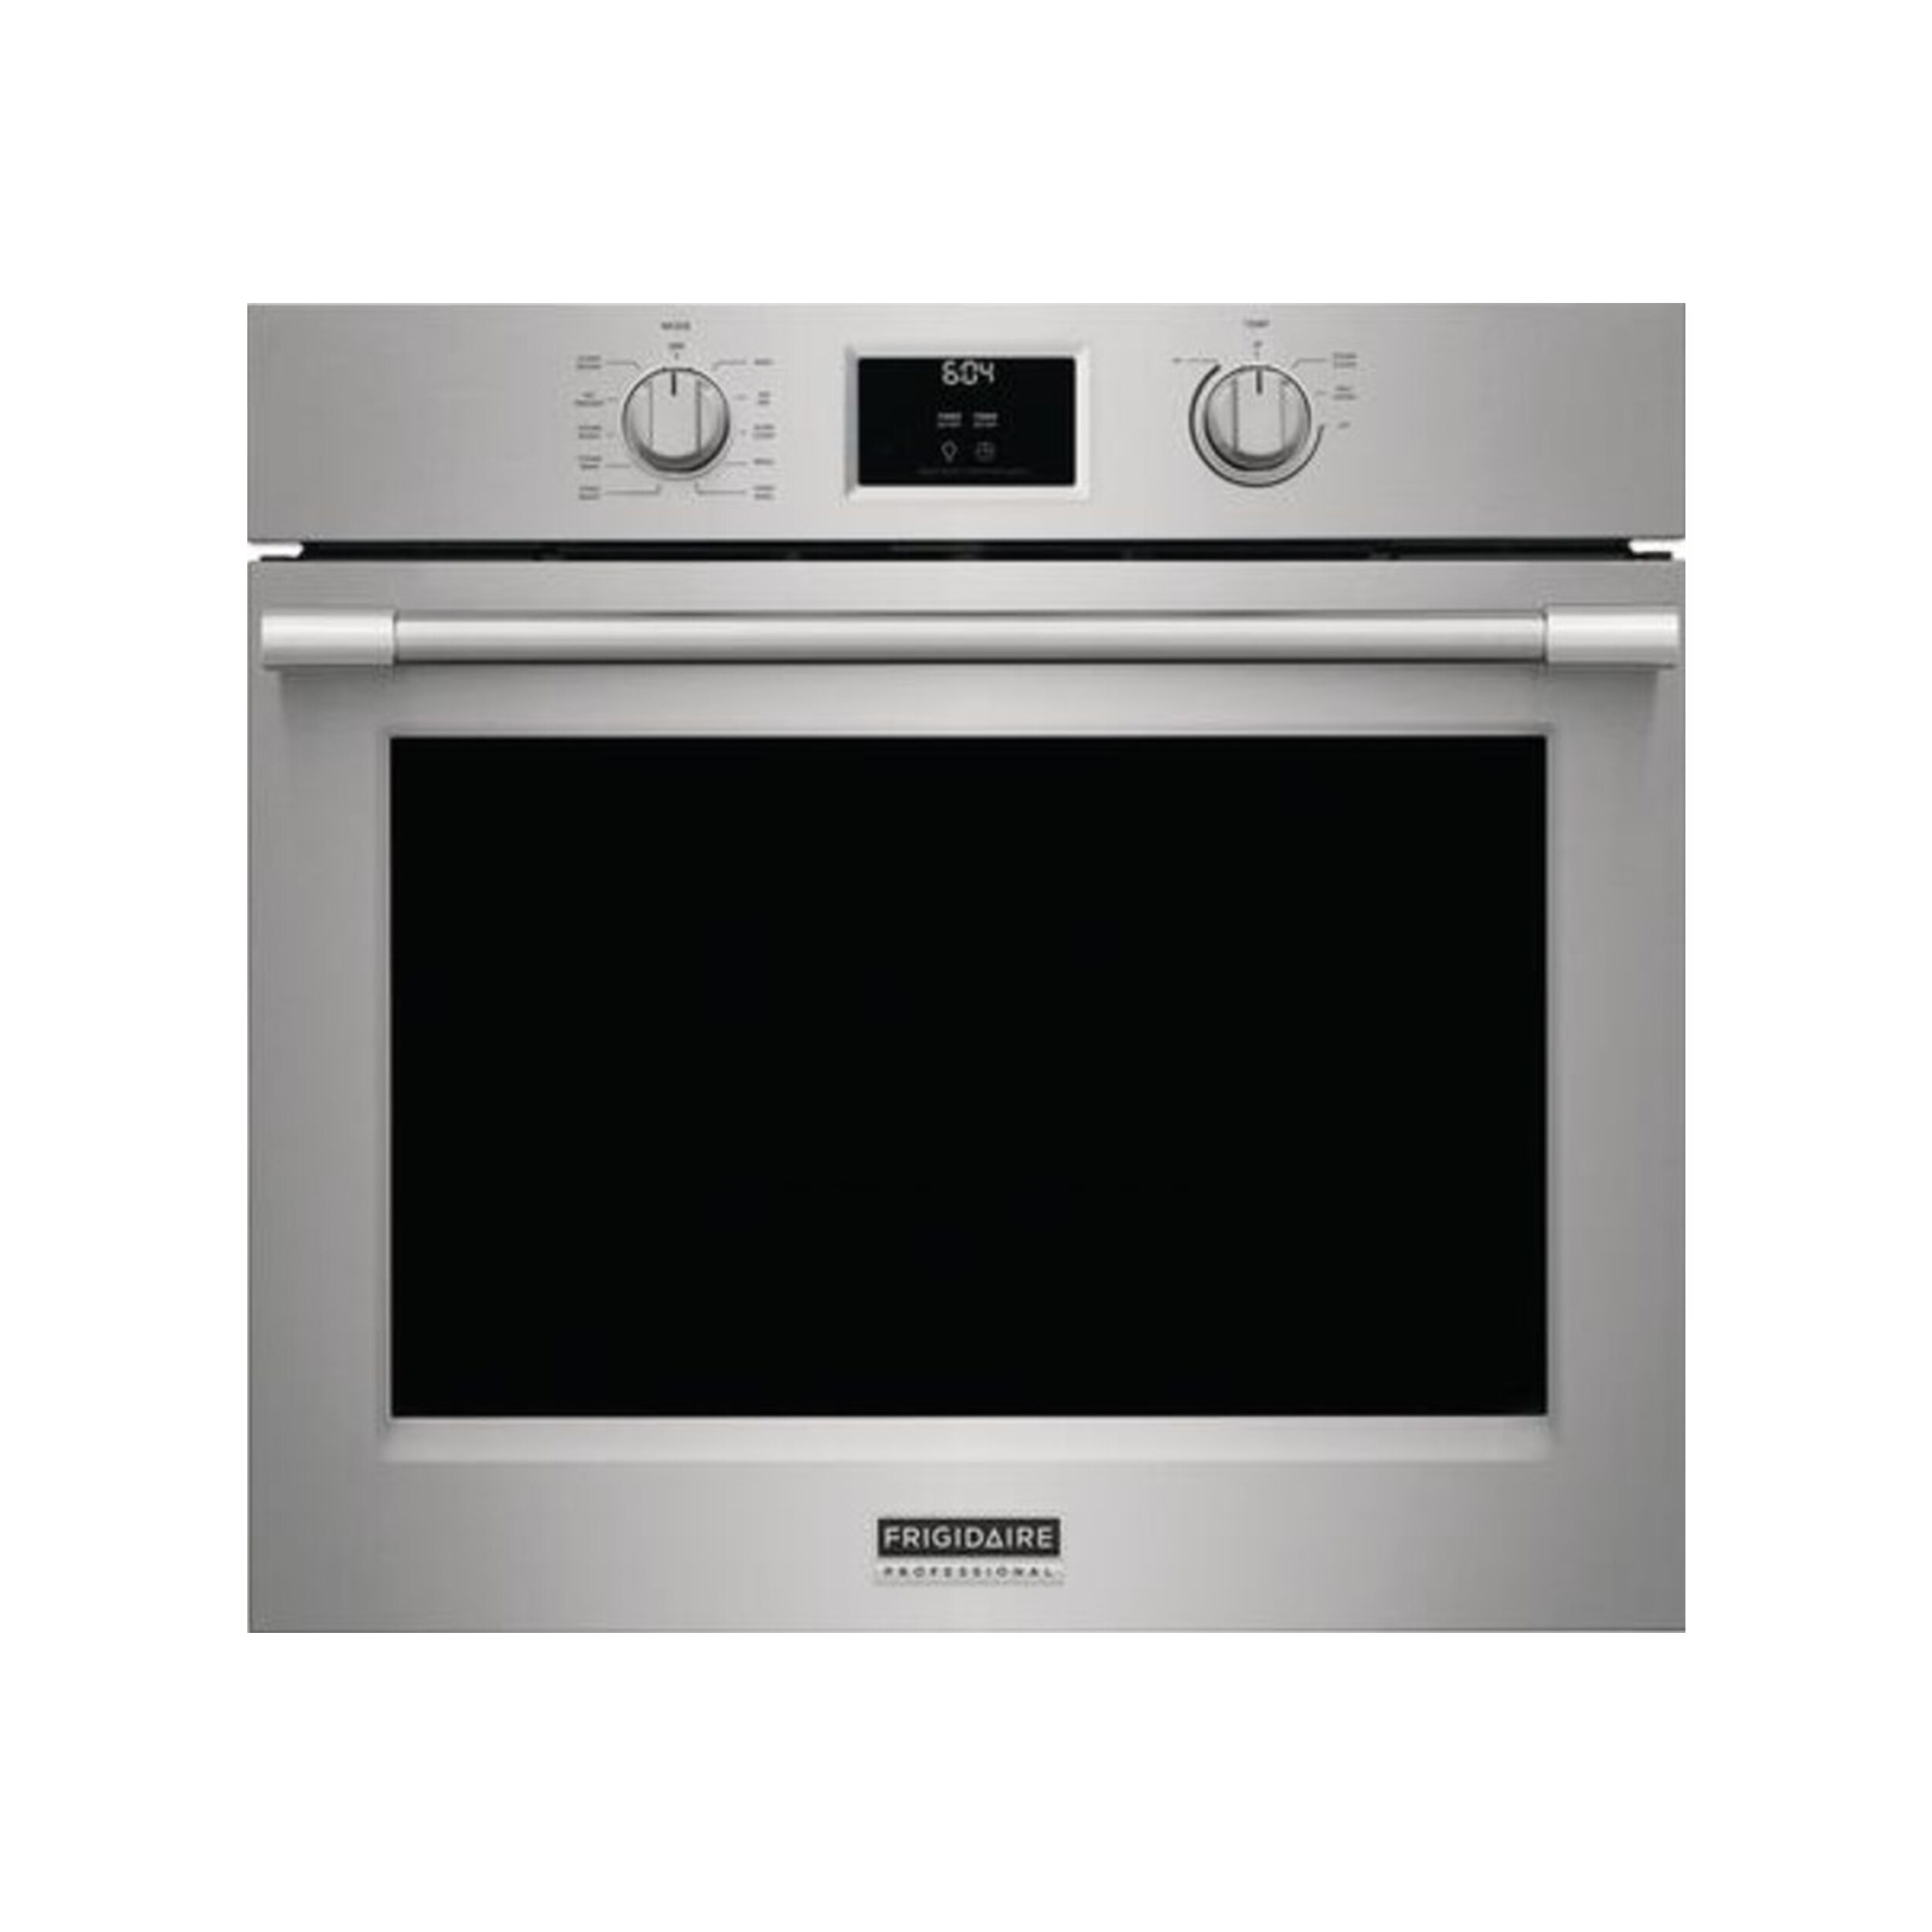 https://ak1.ostkcdn.com/images/products/is/images/direct/76f2455895d6910f1c0cbd06aae1395e236d9ff4/30%22-Single-Wall-Oven-with-Total-Convection.jpg